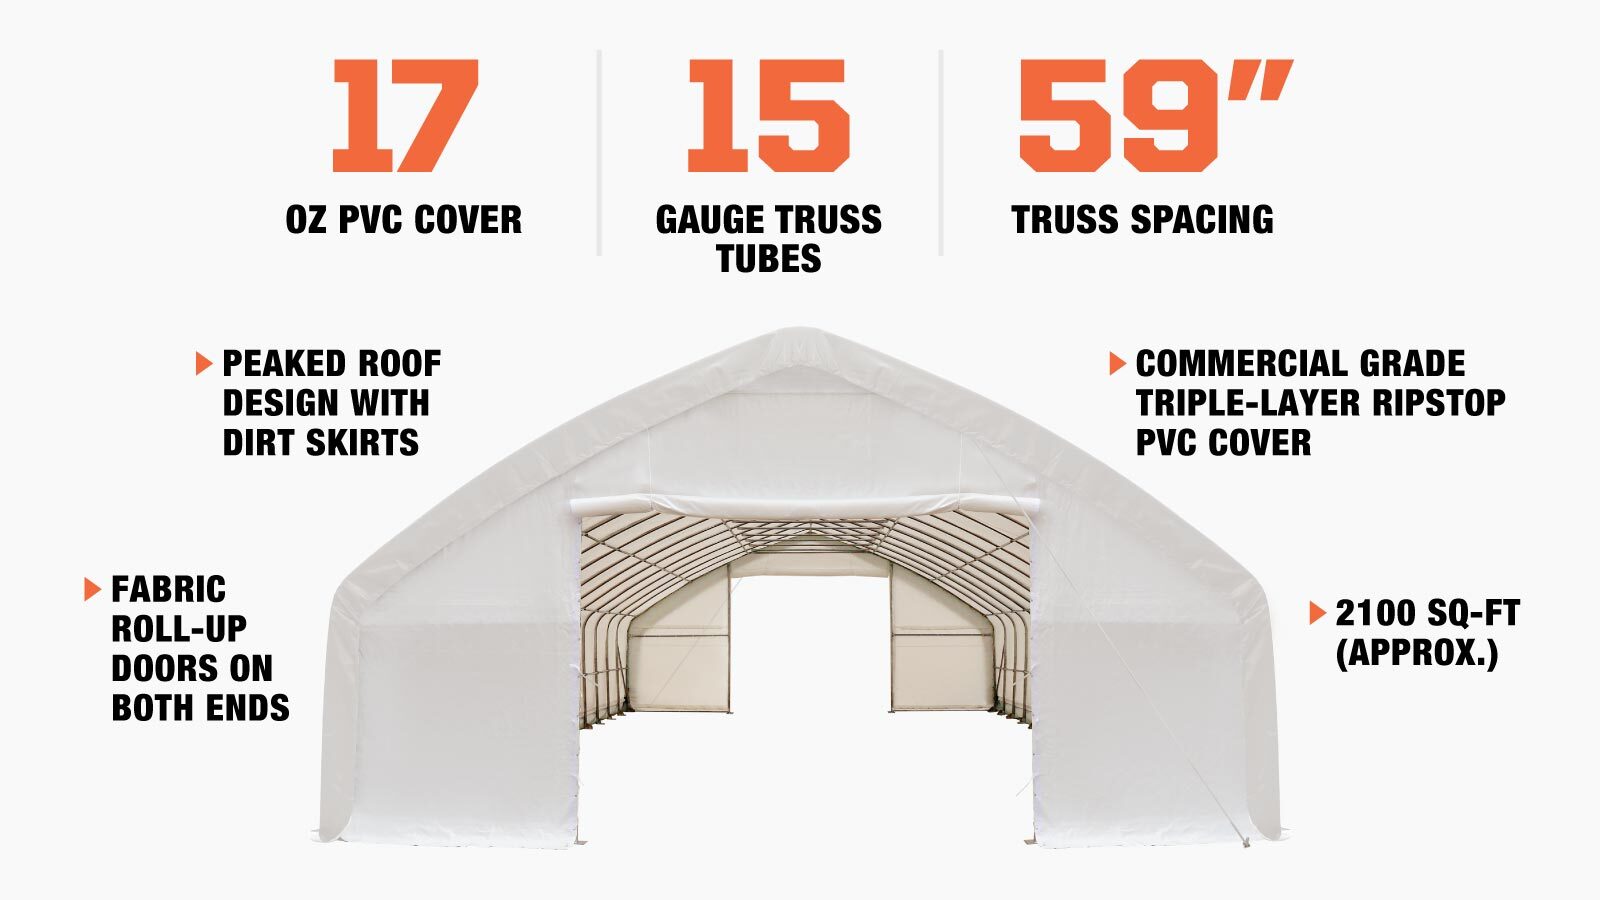 TMG Industrial 30' x 70' Straight Wall Peak Ceiling Storage Shelter with Heavy Duty 17 oz PVC Cover & Drive Through Doors, TMG-ST3070V-description-image